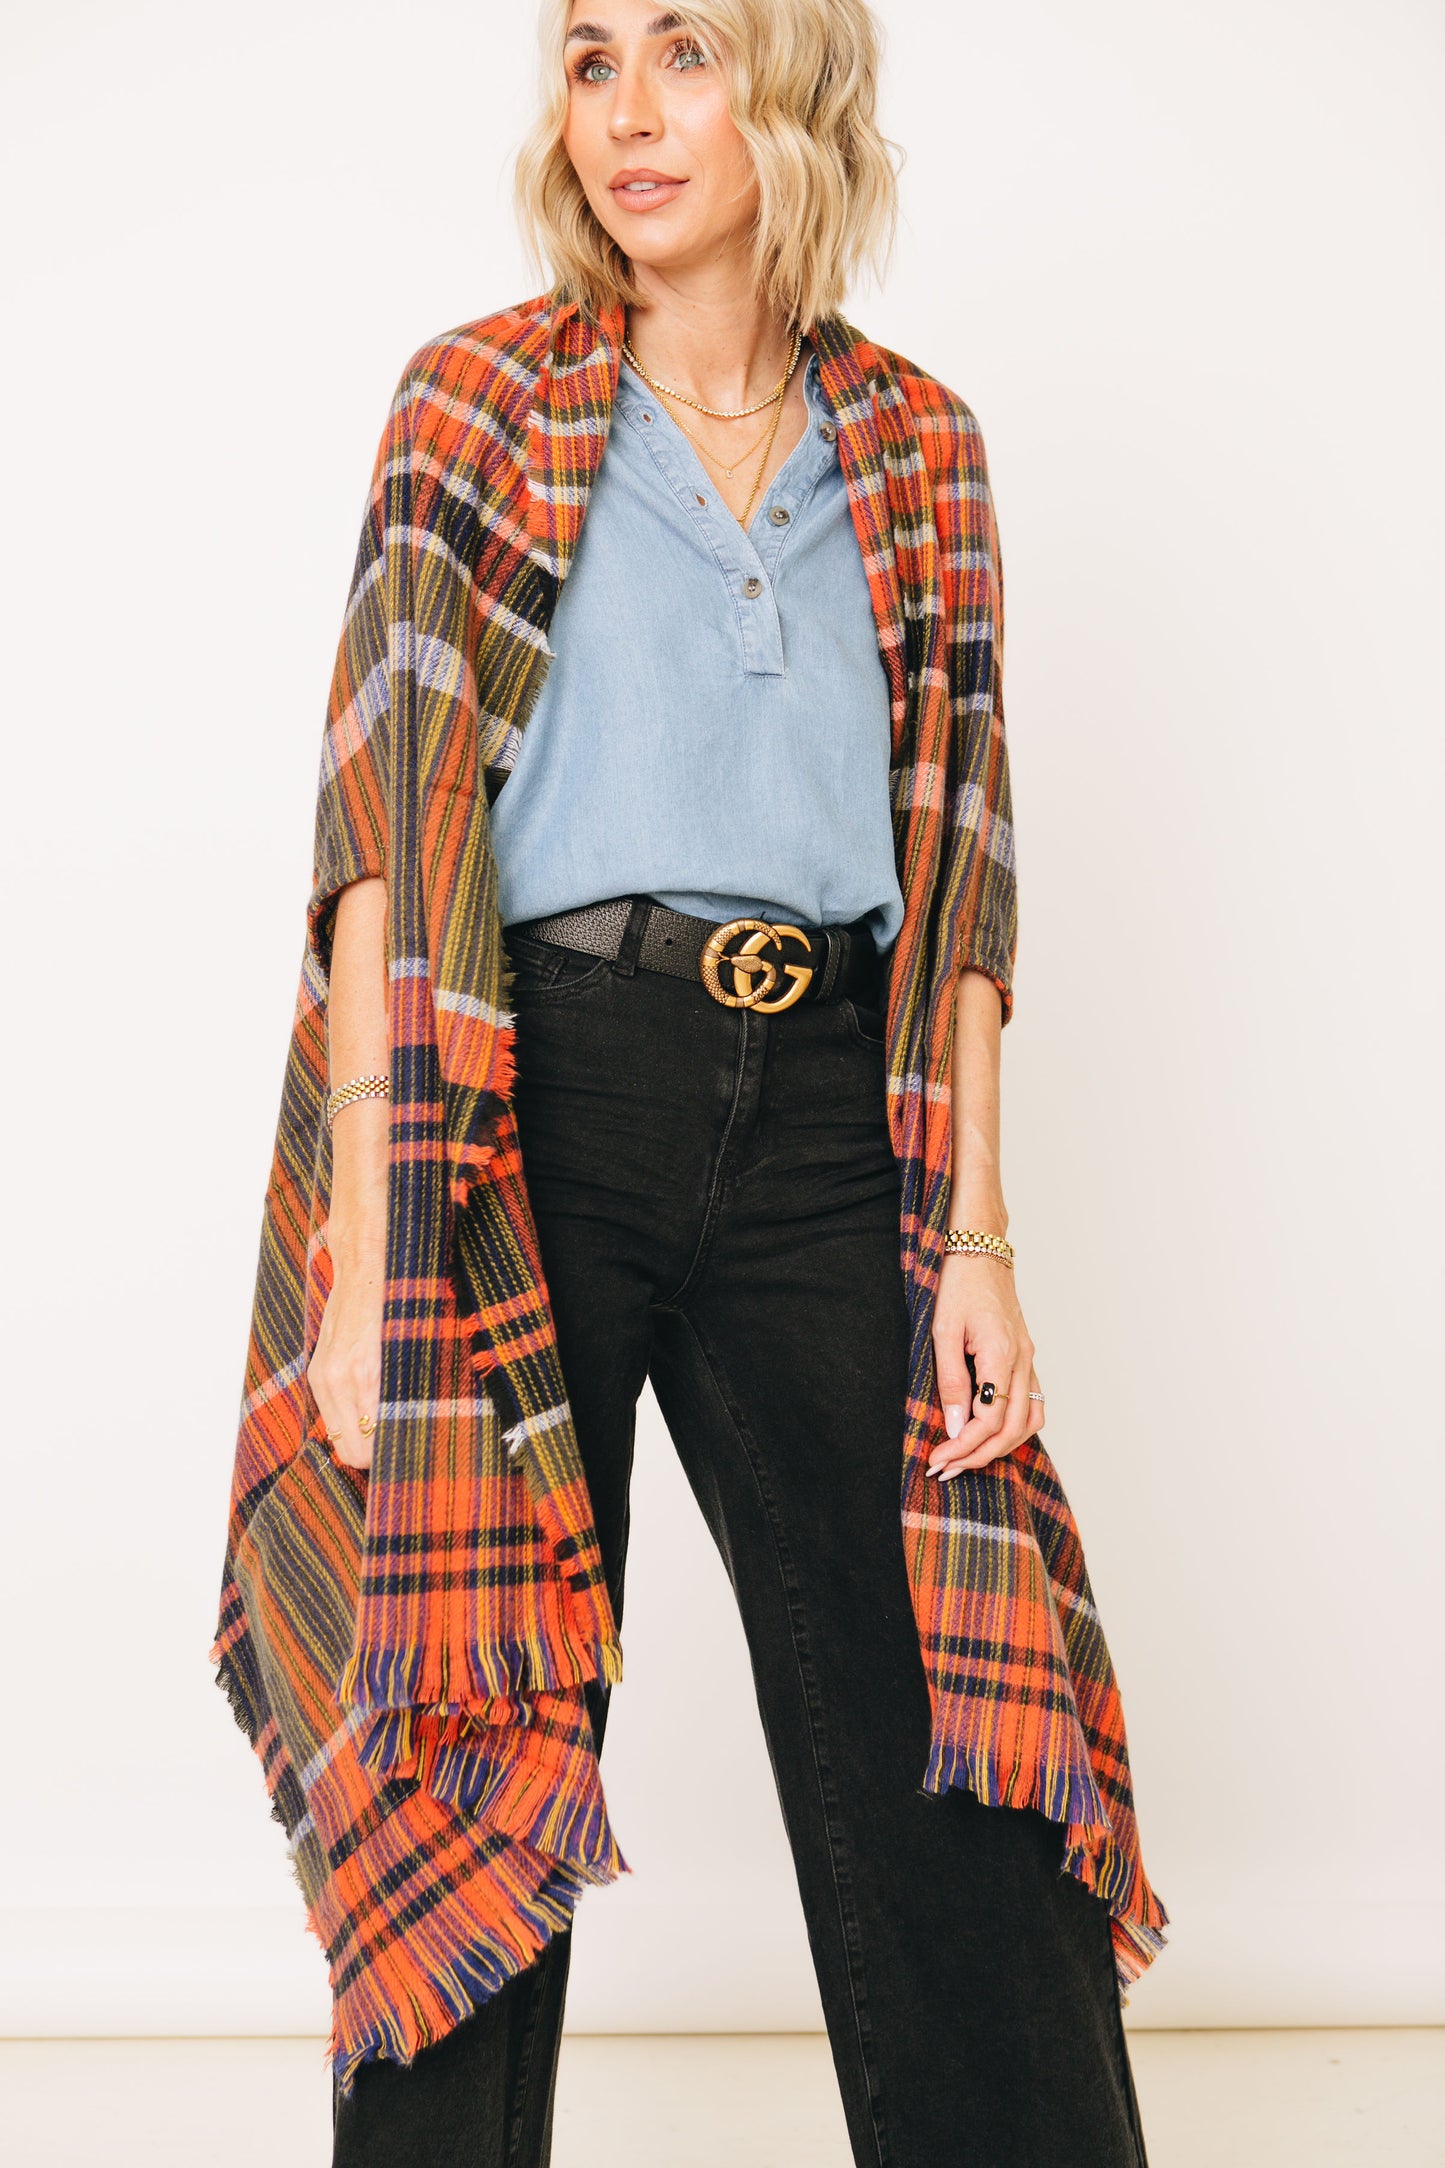 Wrapped In Plaid - Plaid Fringed Ruana (S-3XL)